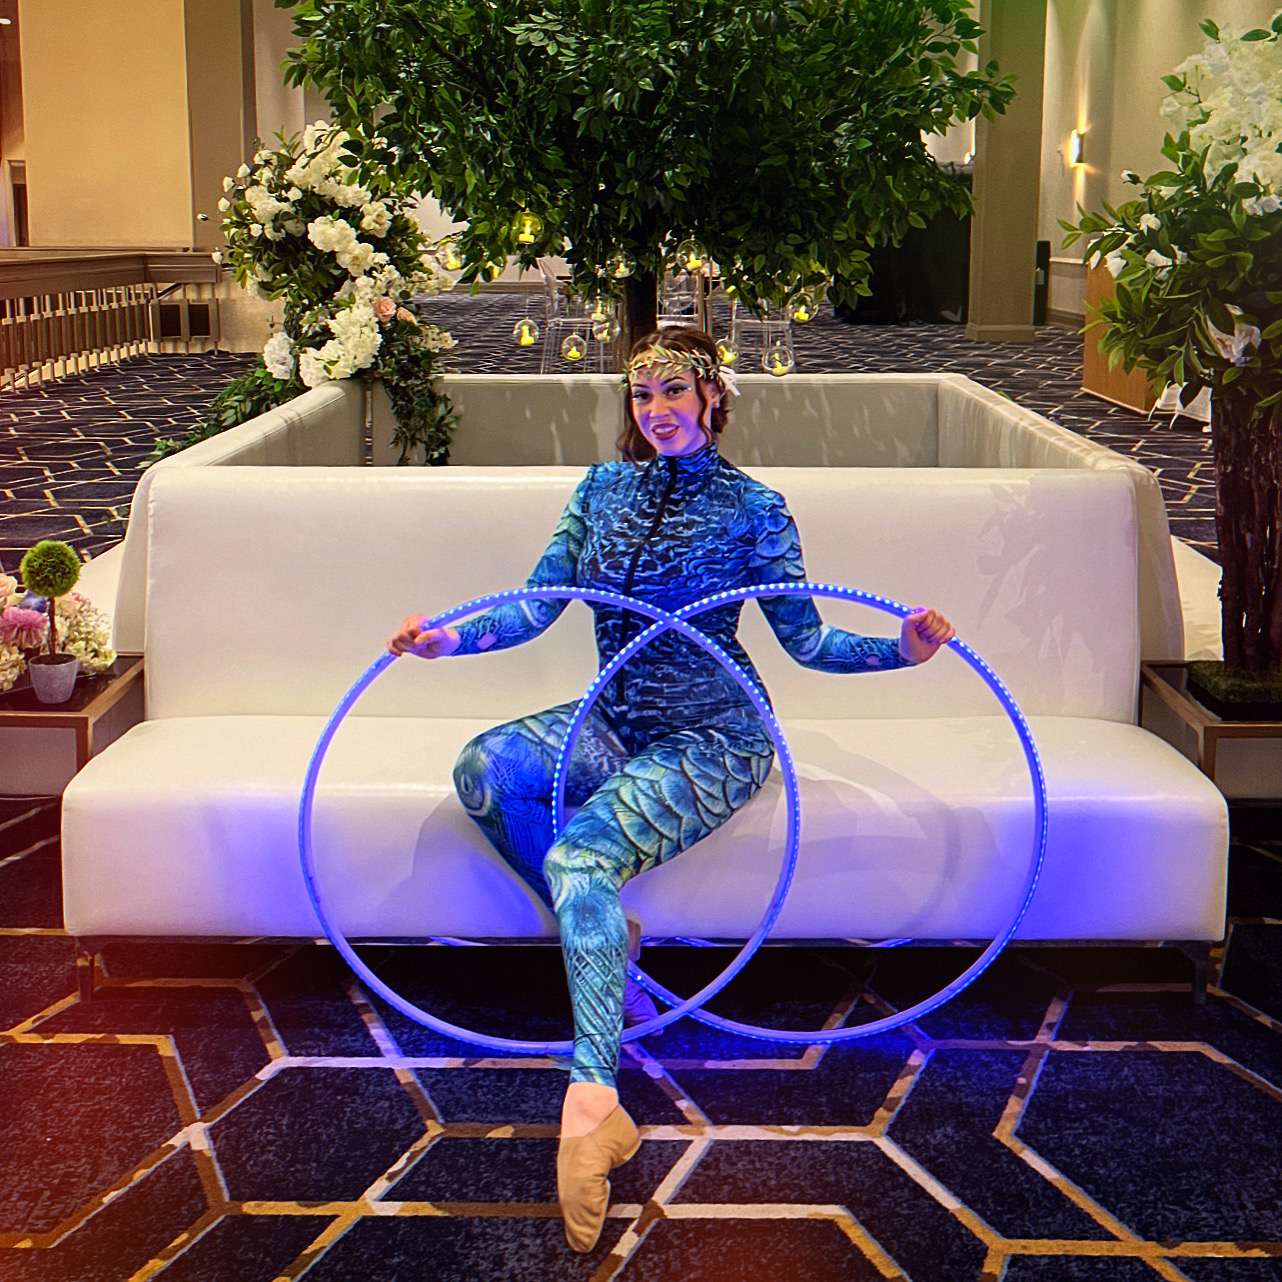 Lyza moon poses on a white couch with LED hula hoops, they are lit up with blue lights,  wearing a blue costume in a banquet wall